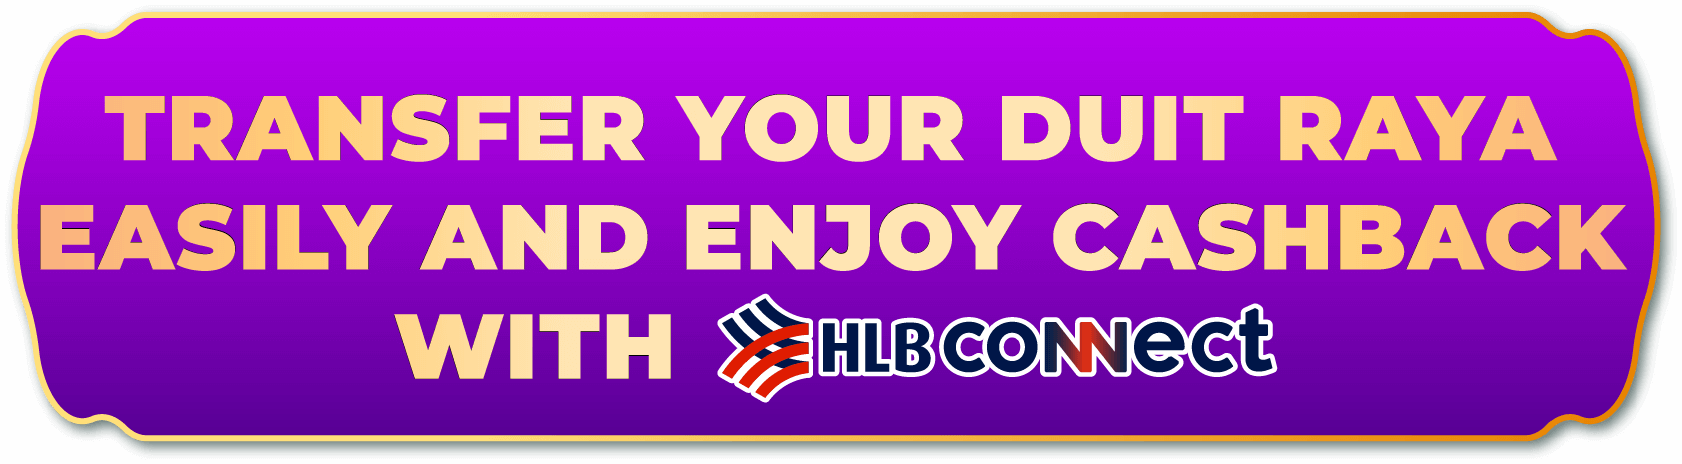 TRANSFER YOUR DUIT RAYA EASILY AND ENJOY CASHBACK WITH HLB CONNECT